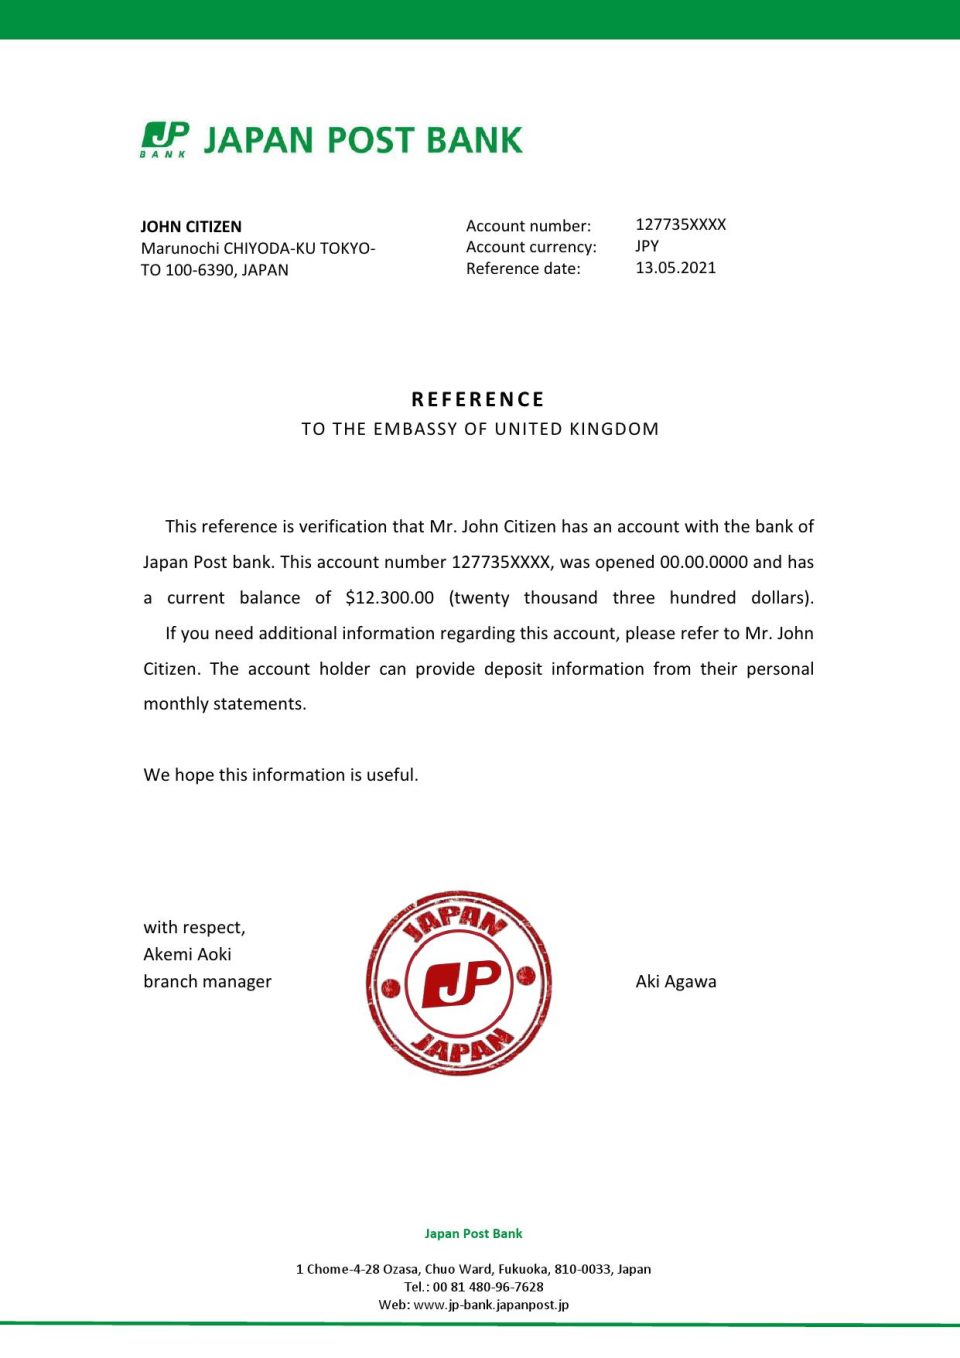 Download Japan Post bank Bank Reference Letter Templates | Editable Word